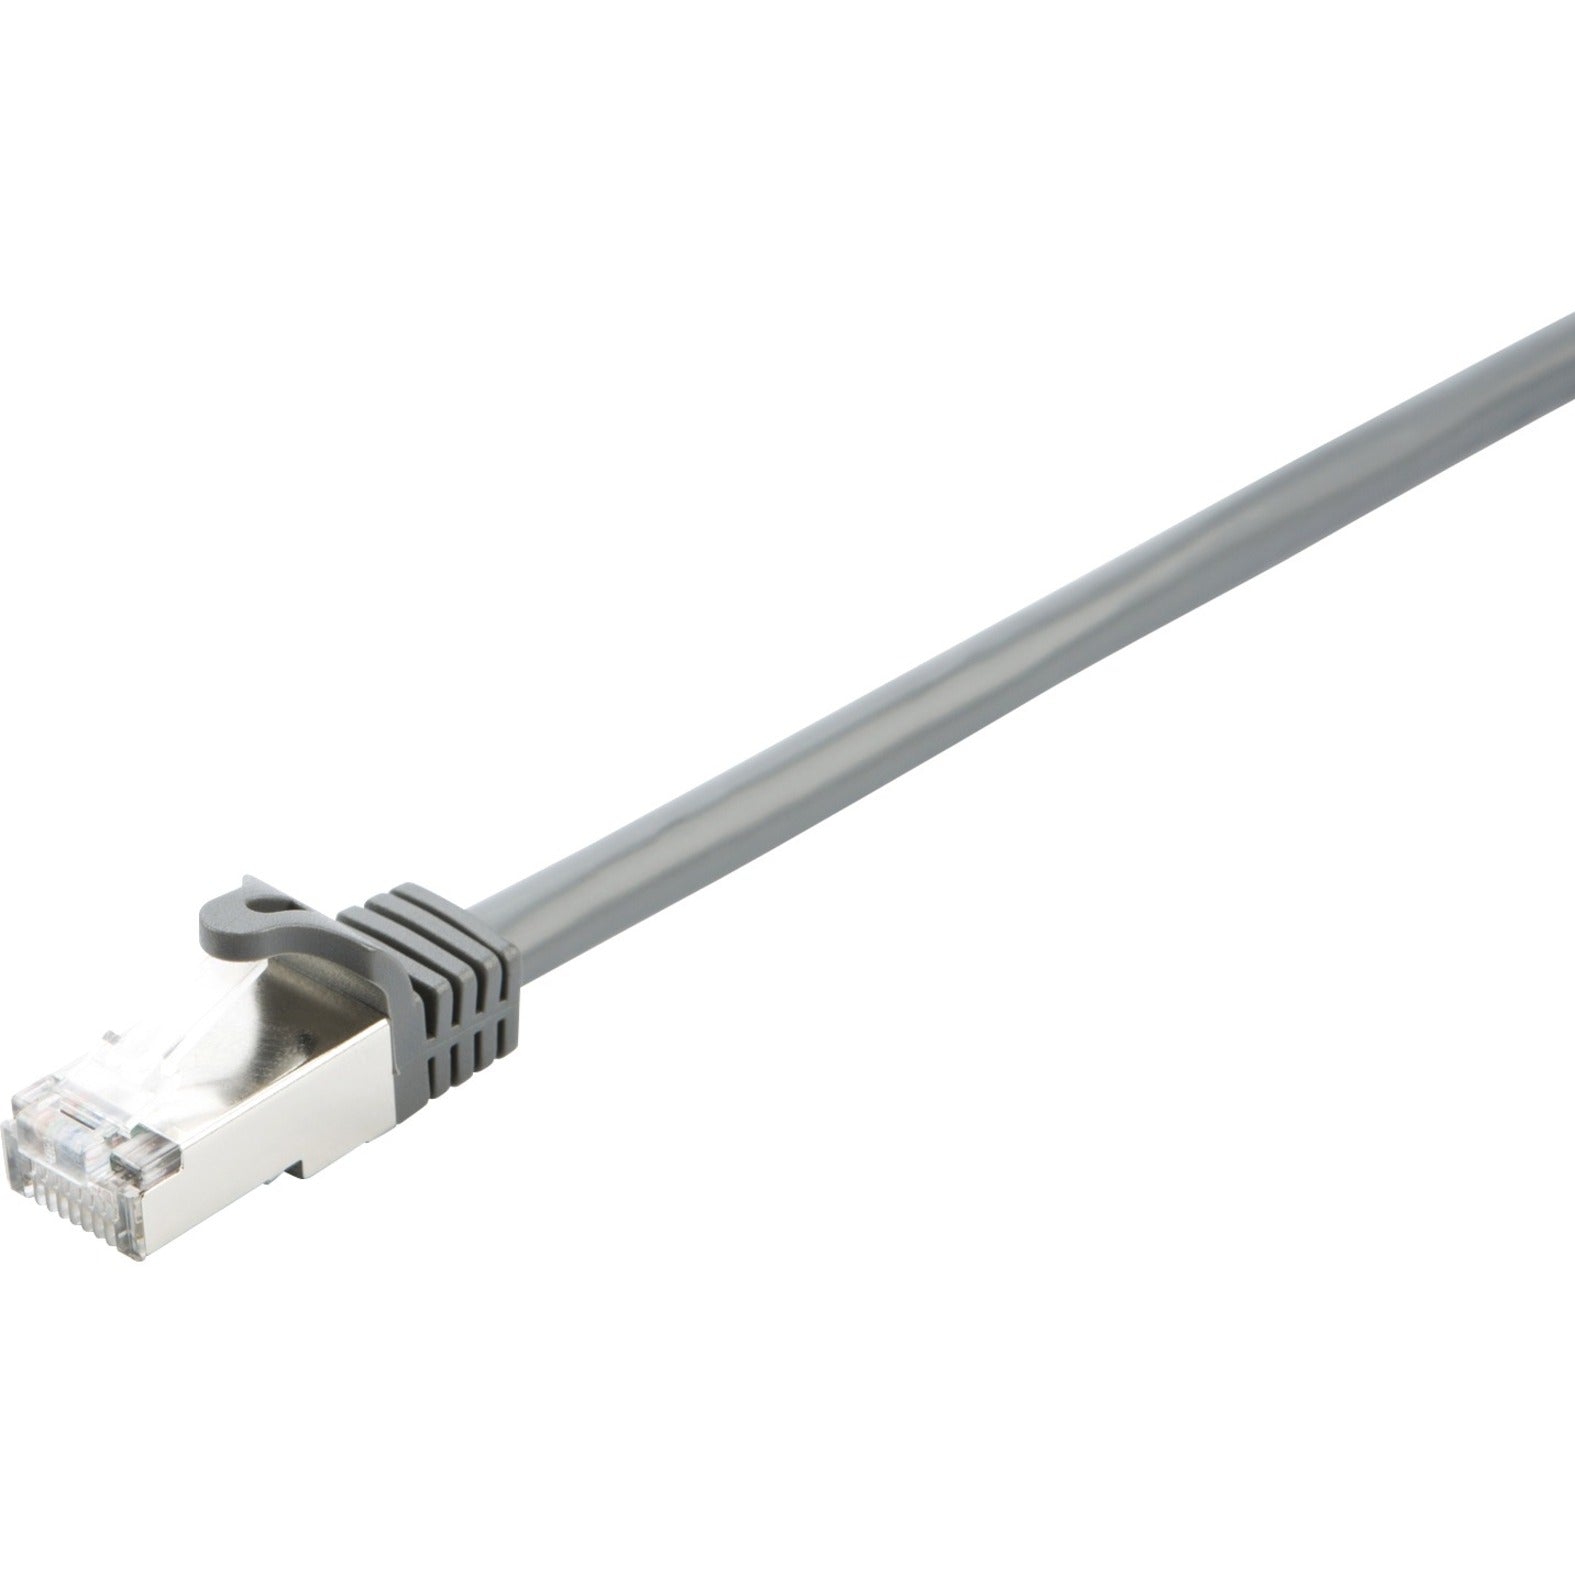 V7 V7CAT5STP-02M-GRY-1N Grey Cat5e Shielded (STP) Cable RJ45 Male to RJ45 Male 2m 6.6ft, Molded, Booted, Locking Latch, Strain Relief, Noise Reducing